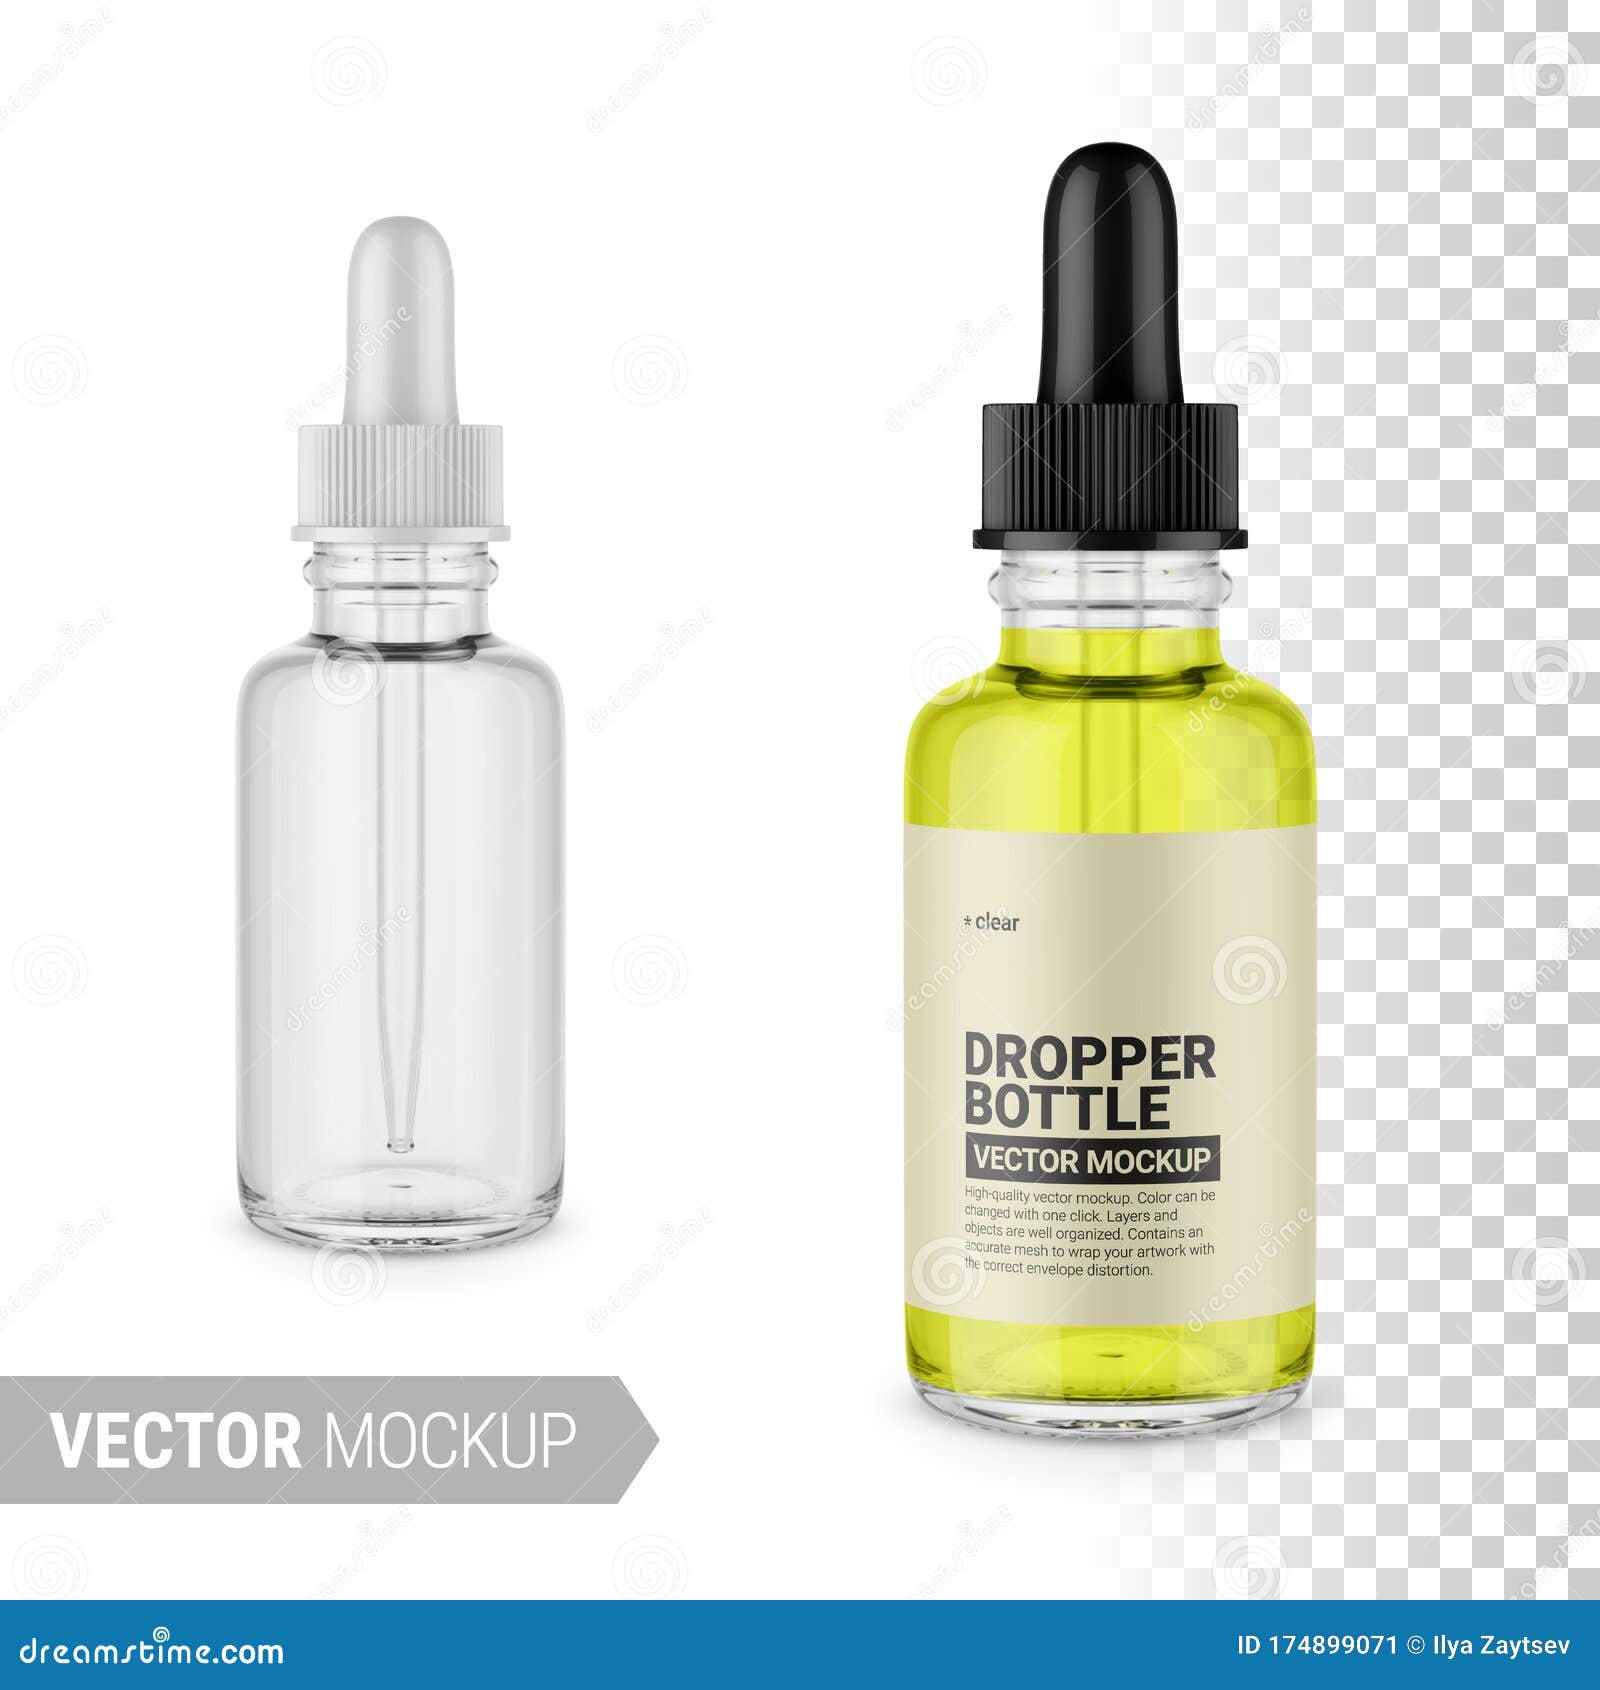 Download Clear Glass Dropper Bottle Mockup Vector Illustration Stock Illustration Illustration Of Container Bottle 174899071 PSD Mockup Templates